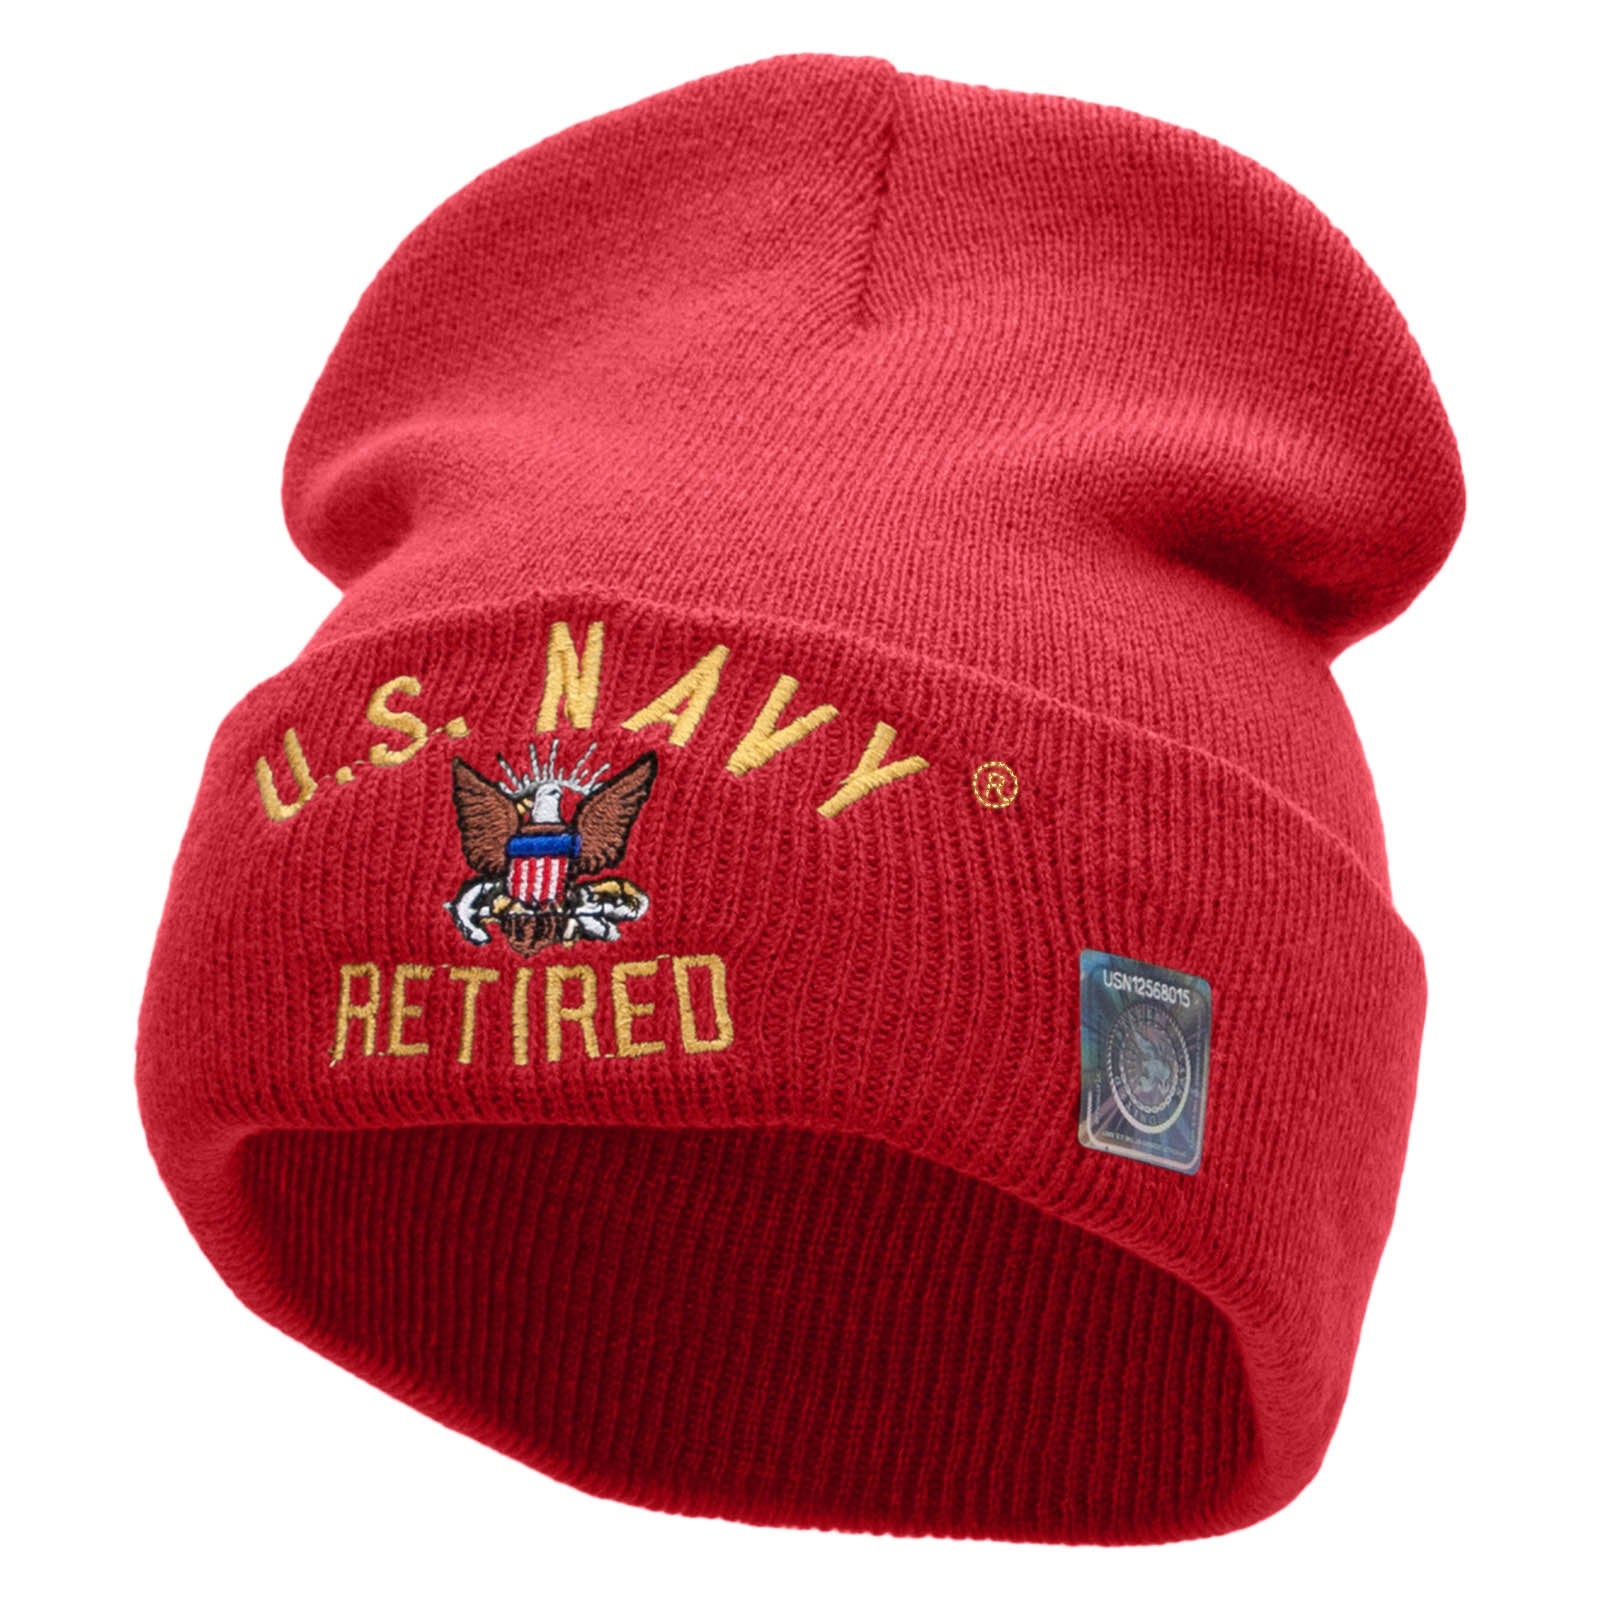 Licensed US Navy Retired Military Embroidered Long Beanie Made in USA - Red OSFM